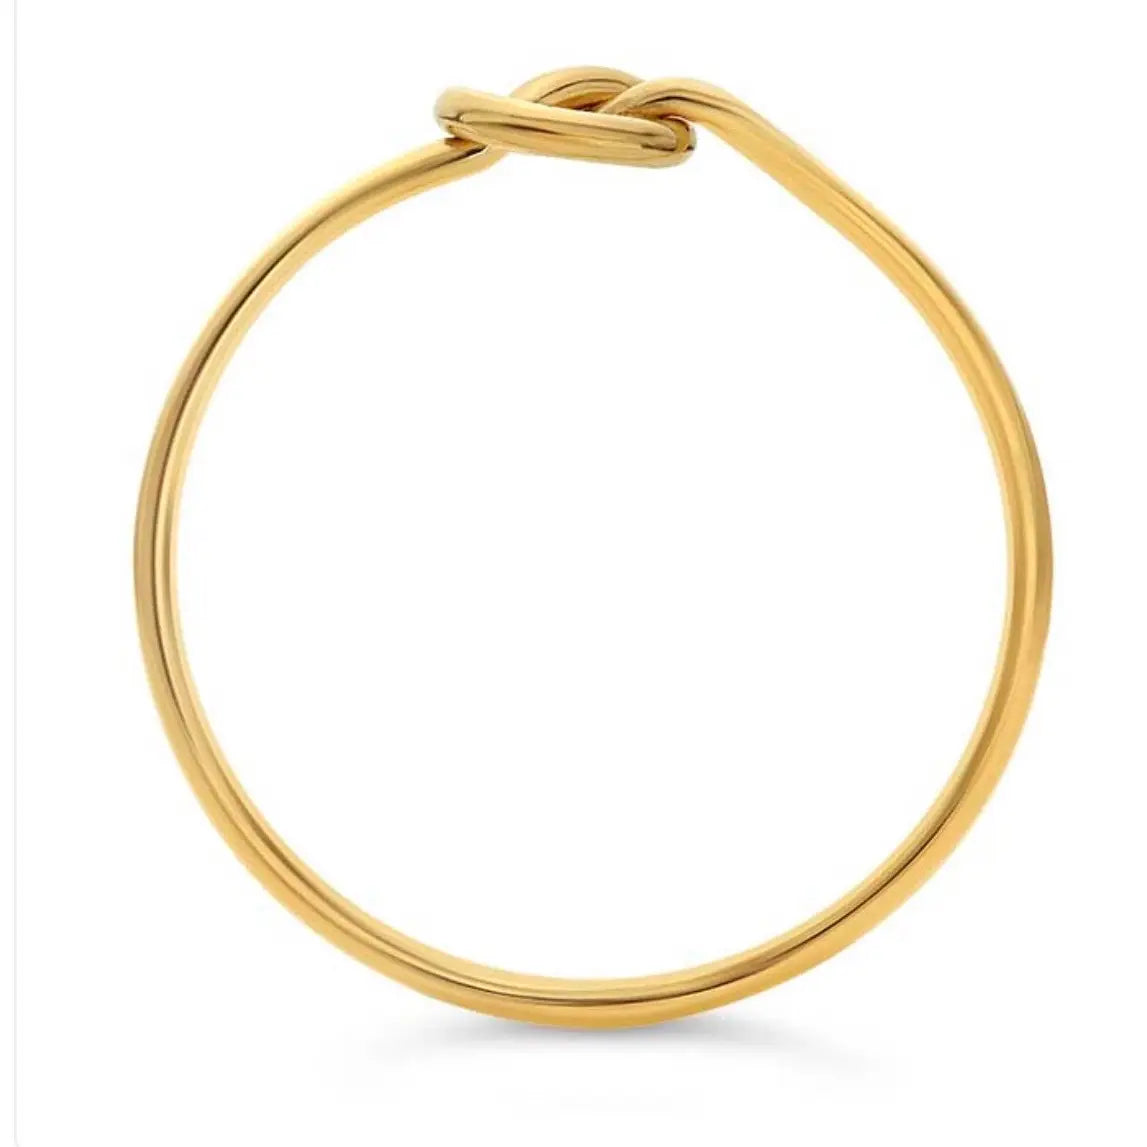 Gold Filled Stackable Ring- Knot Ring